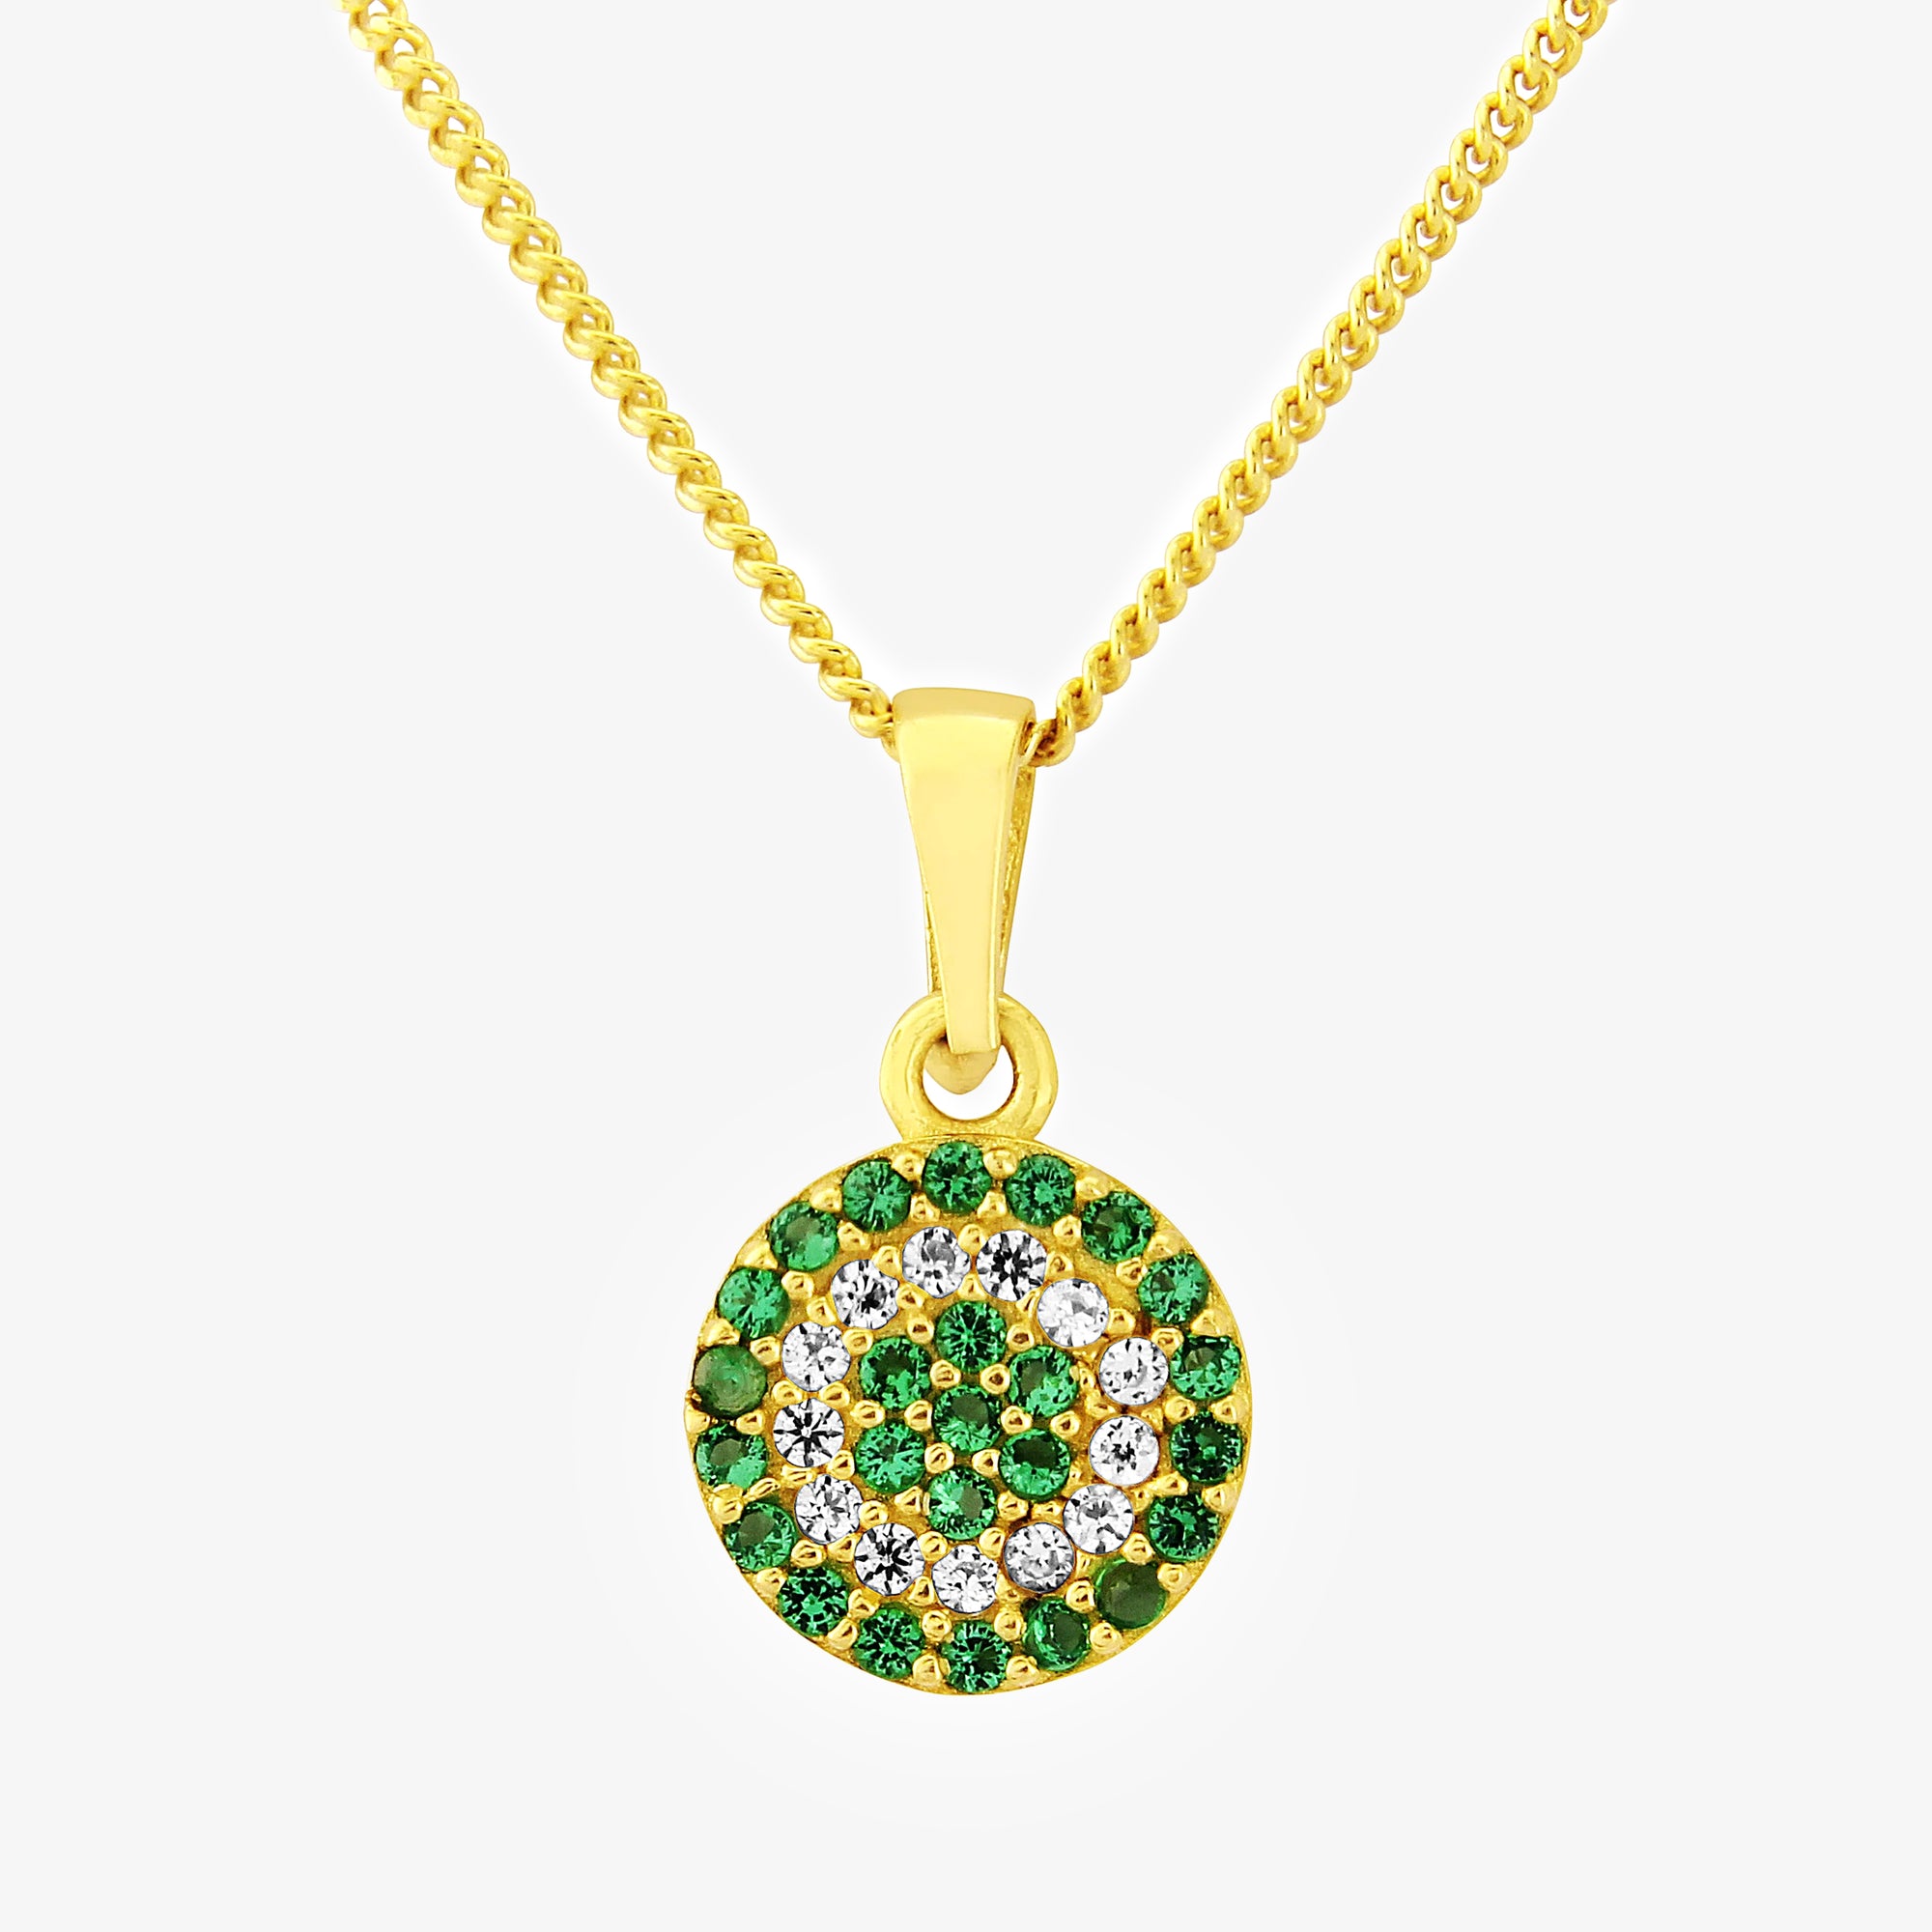 9ct Yellow Gold  Round pendant filled with green and white czs 